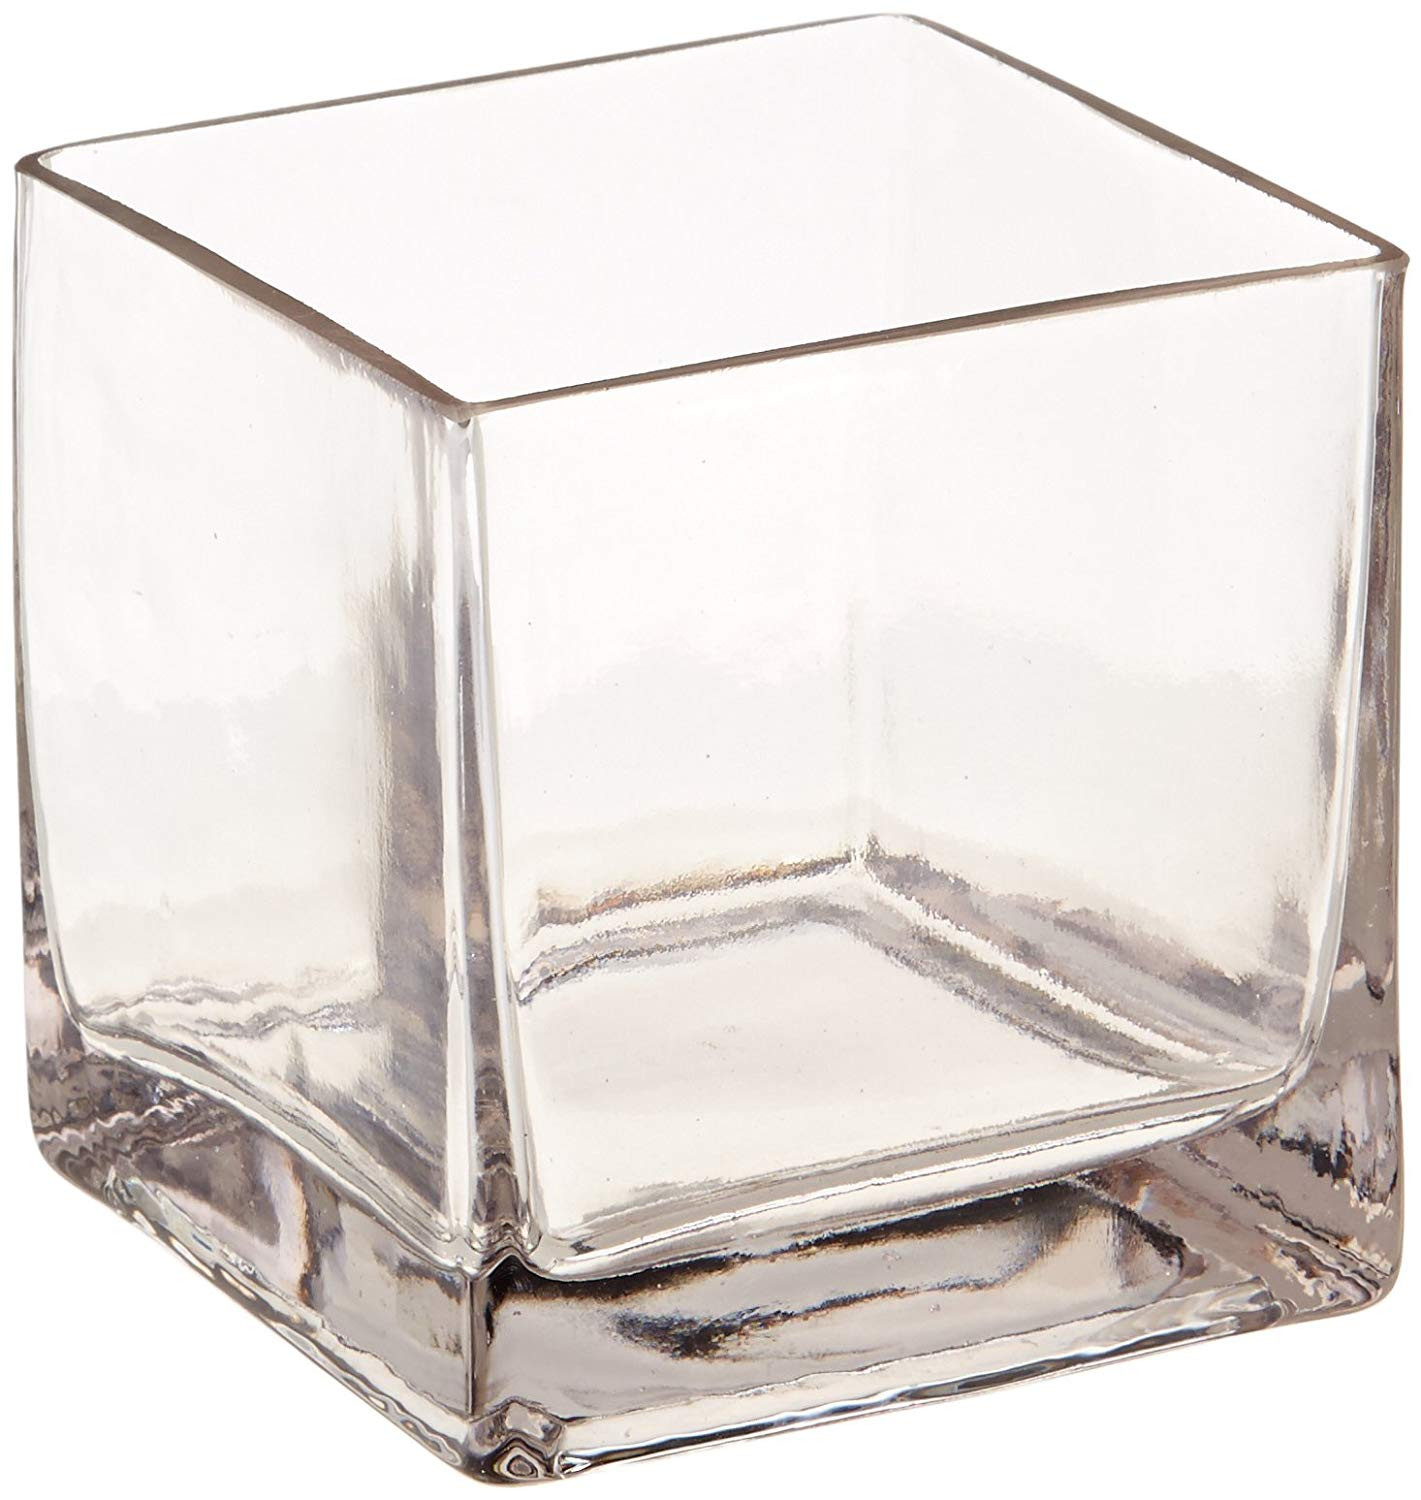 28 Cute Alexander Kalifano Vase 2024 free download alexander kalifano vase of amazon com 12piece 4 square crystal clear glass vase home kitchen with 71 jezfmvnl sl1500